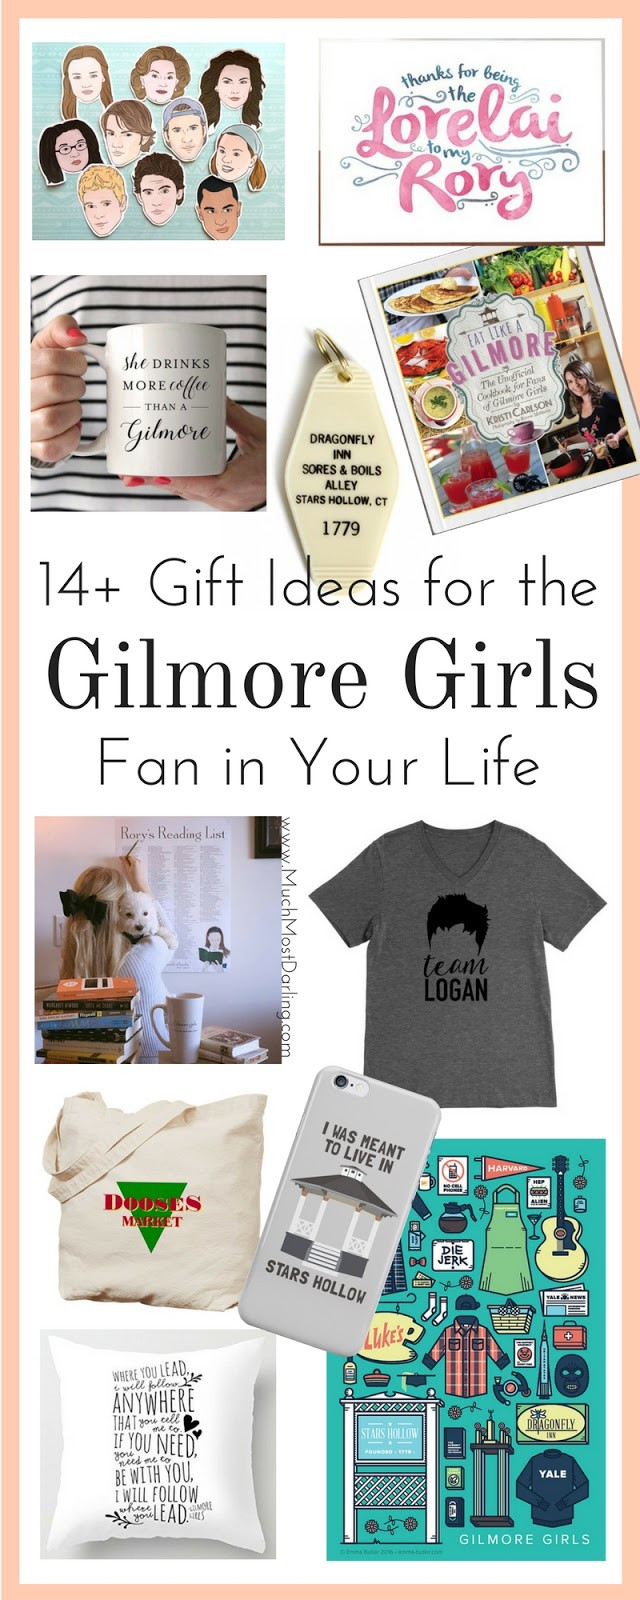 Gilmore Girls Gift Ideas
 Warby Parker At Home Try 6 Much Most Darling